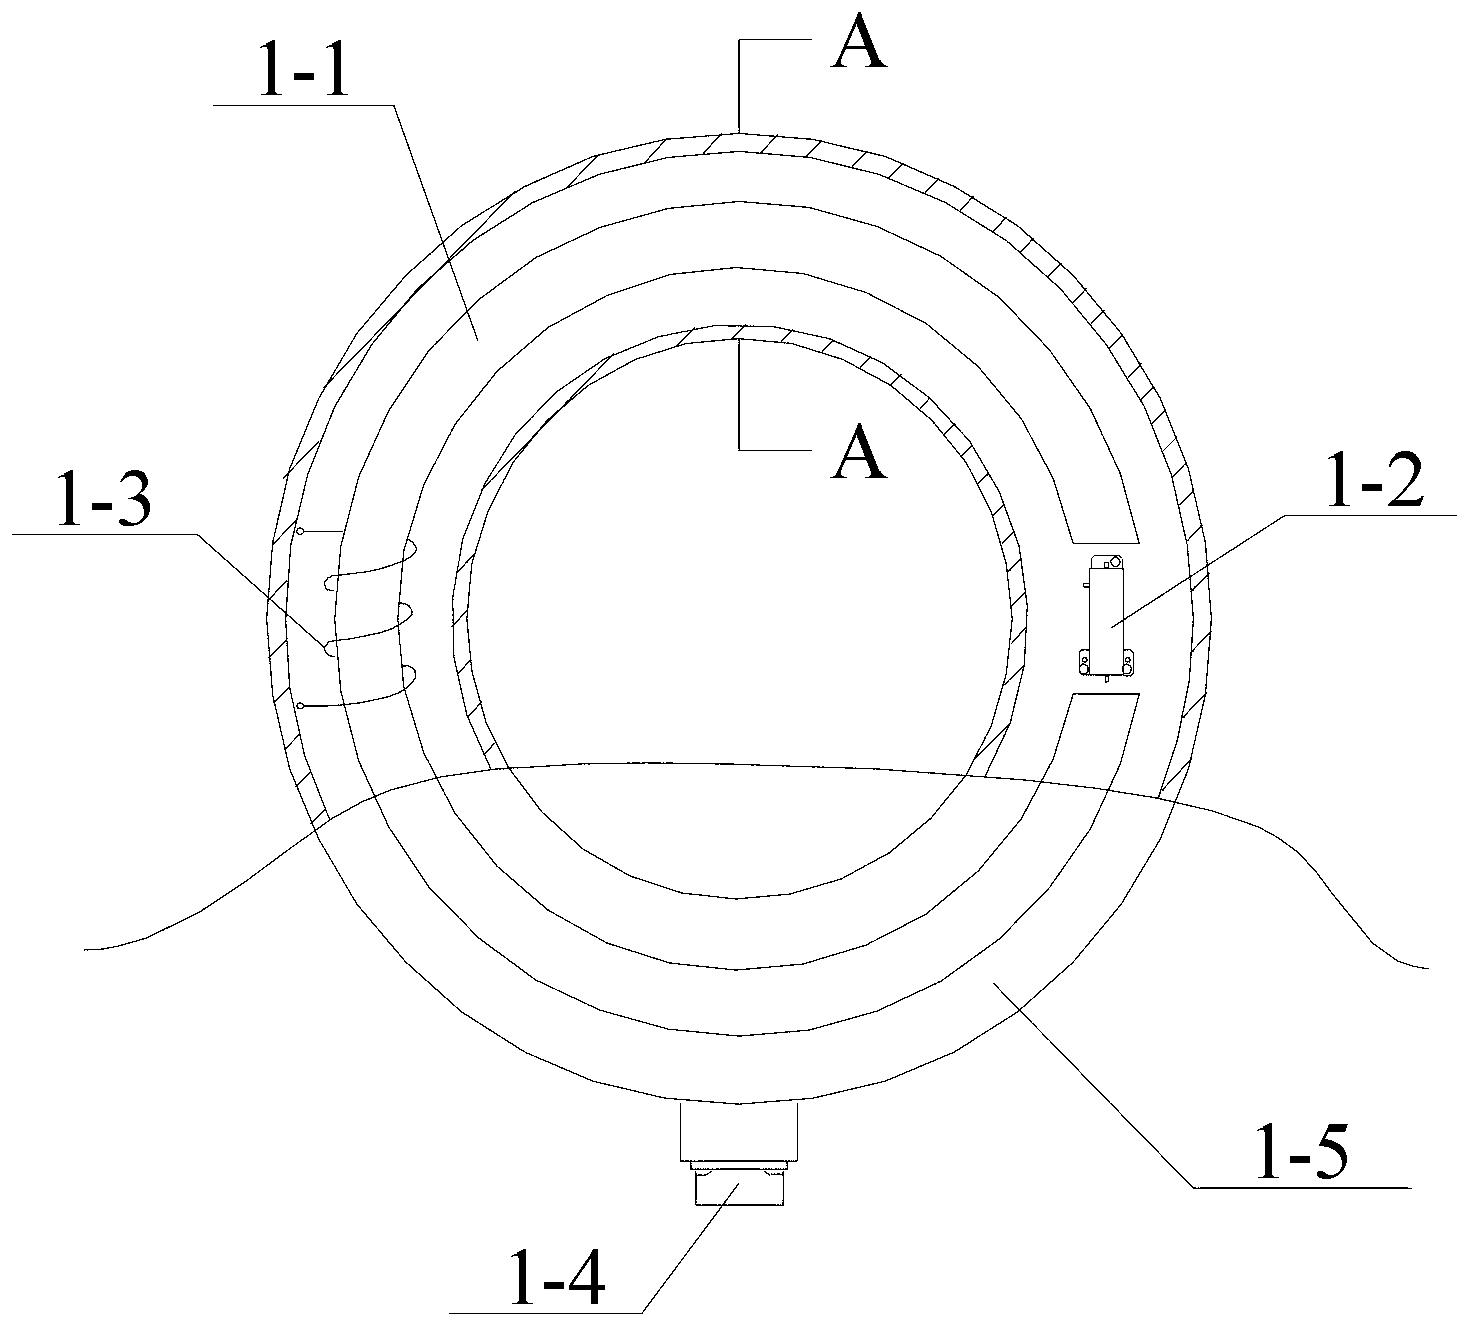 Mixing optics current transformer and method for achieving self-correcting measurement thereof